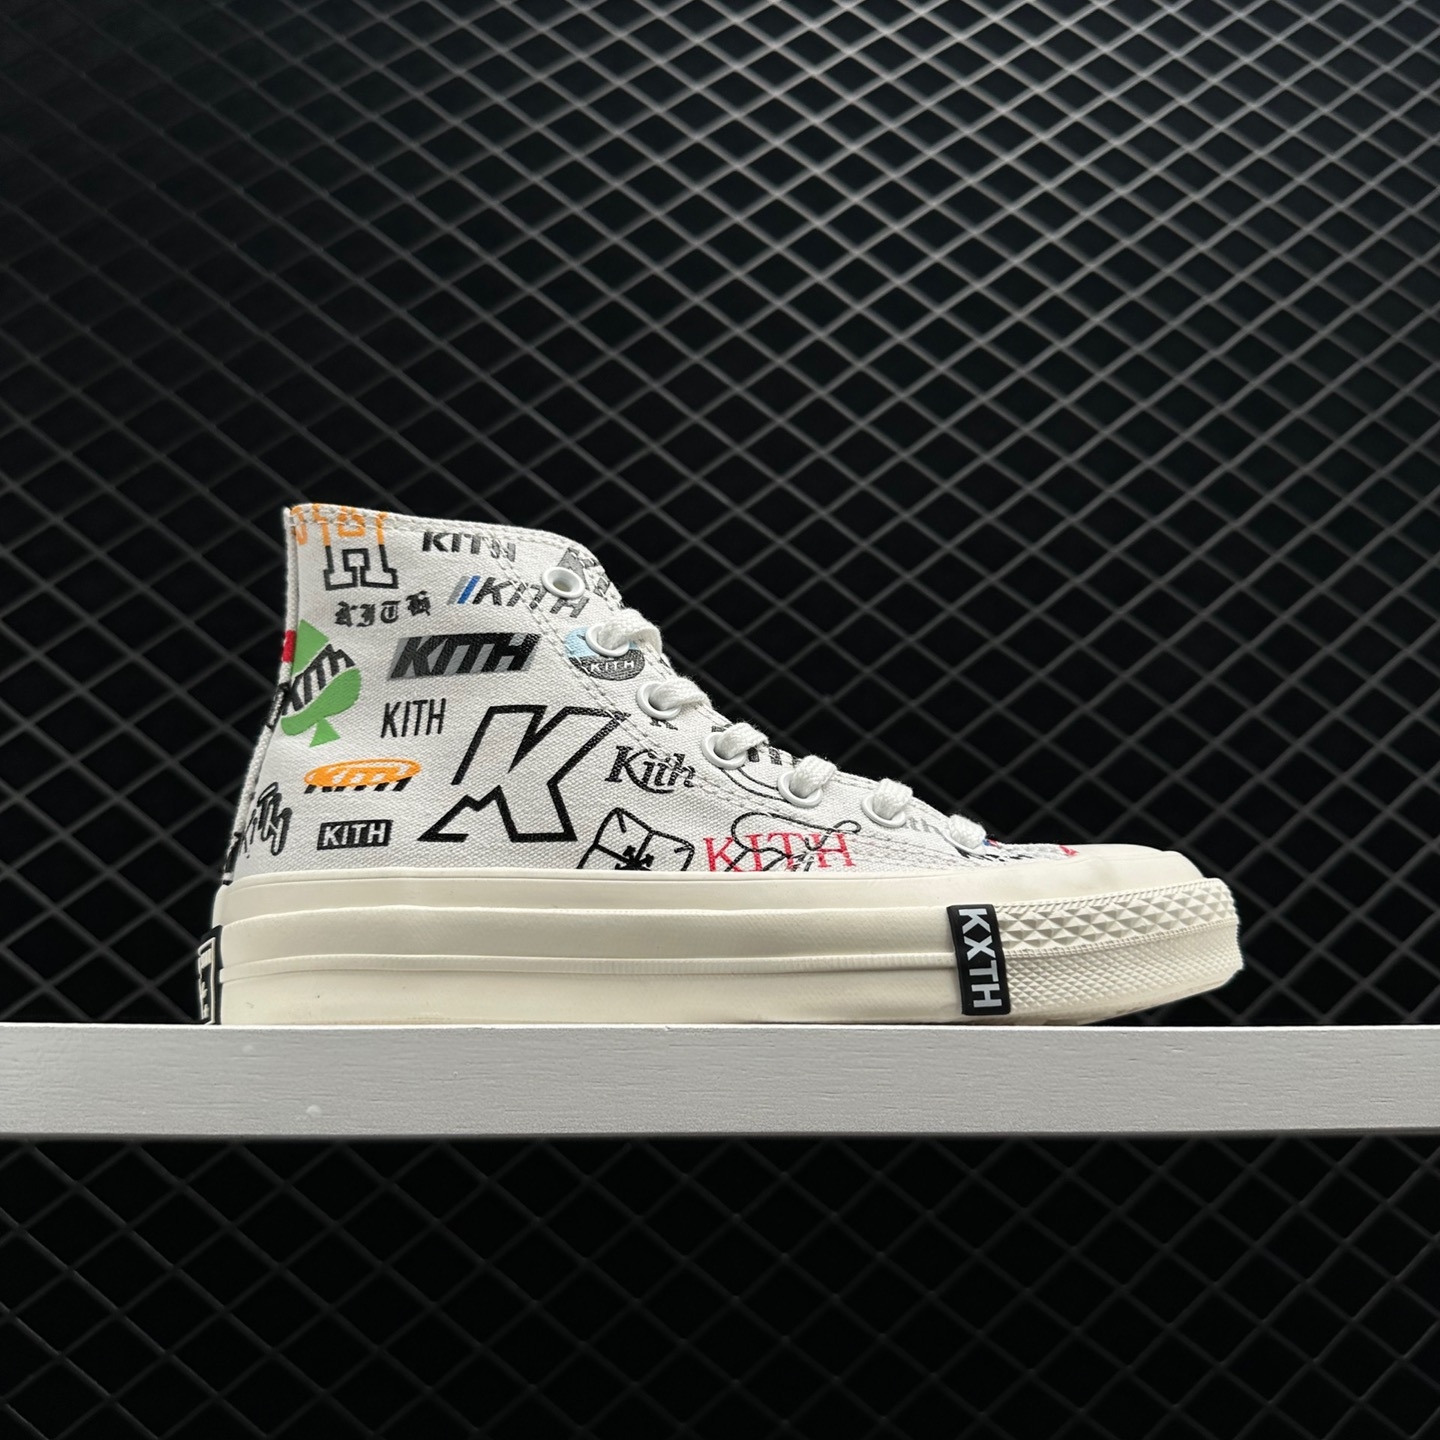 Converse Chuck Taylor All-Star 70 Hi Kith 10 Year Anniversary White - Limited Edition Sneakers